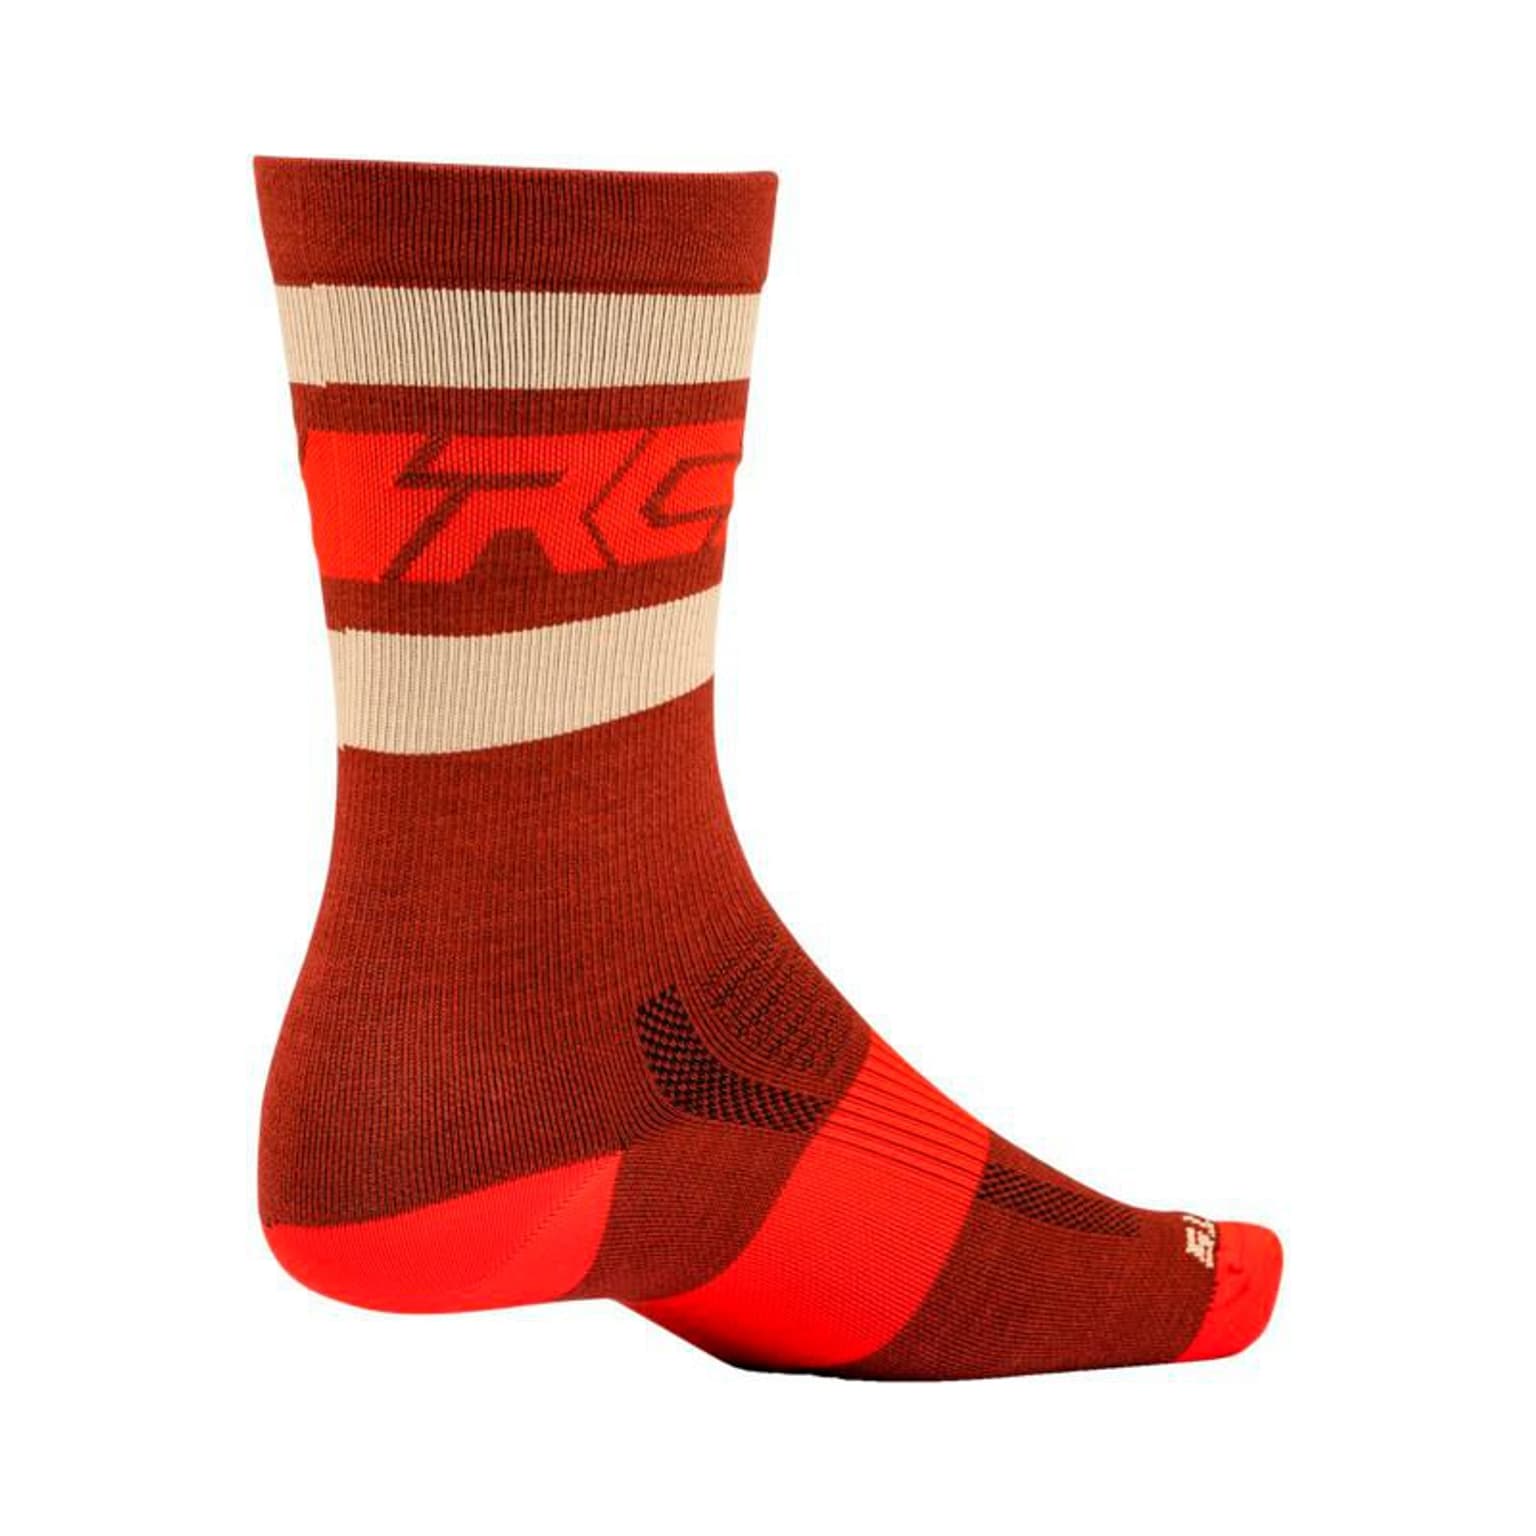 Ride Concepts Ride Concepts Woll Fifty-Fifty Velosocken rouge 2